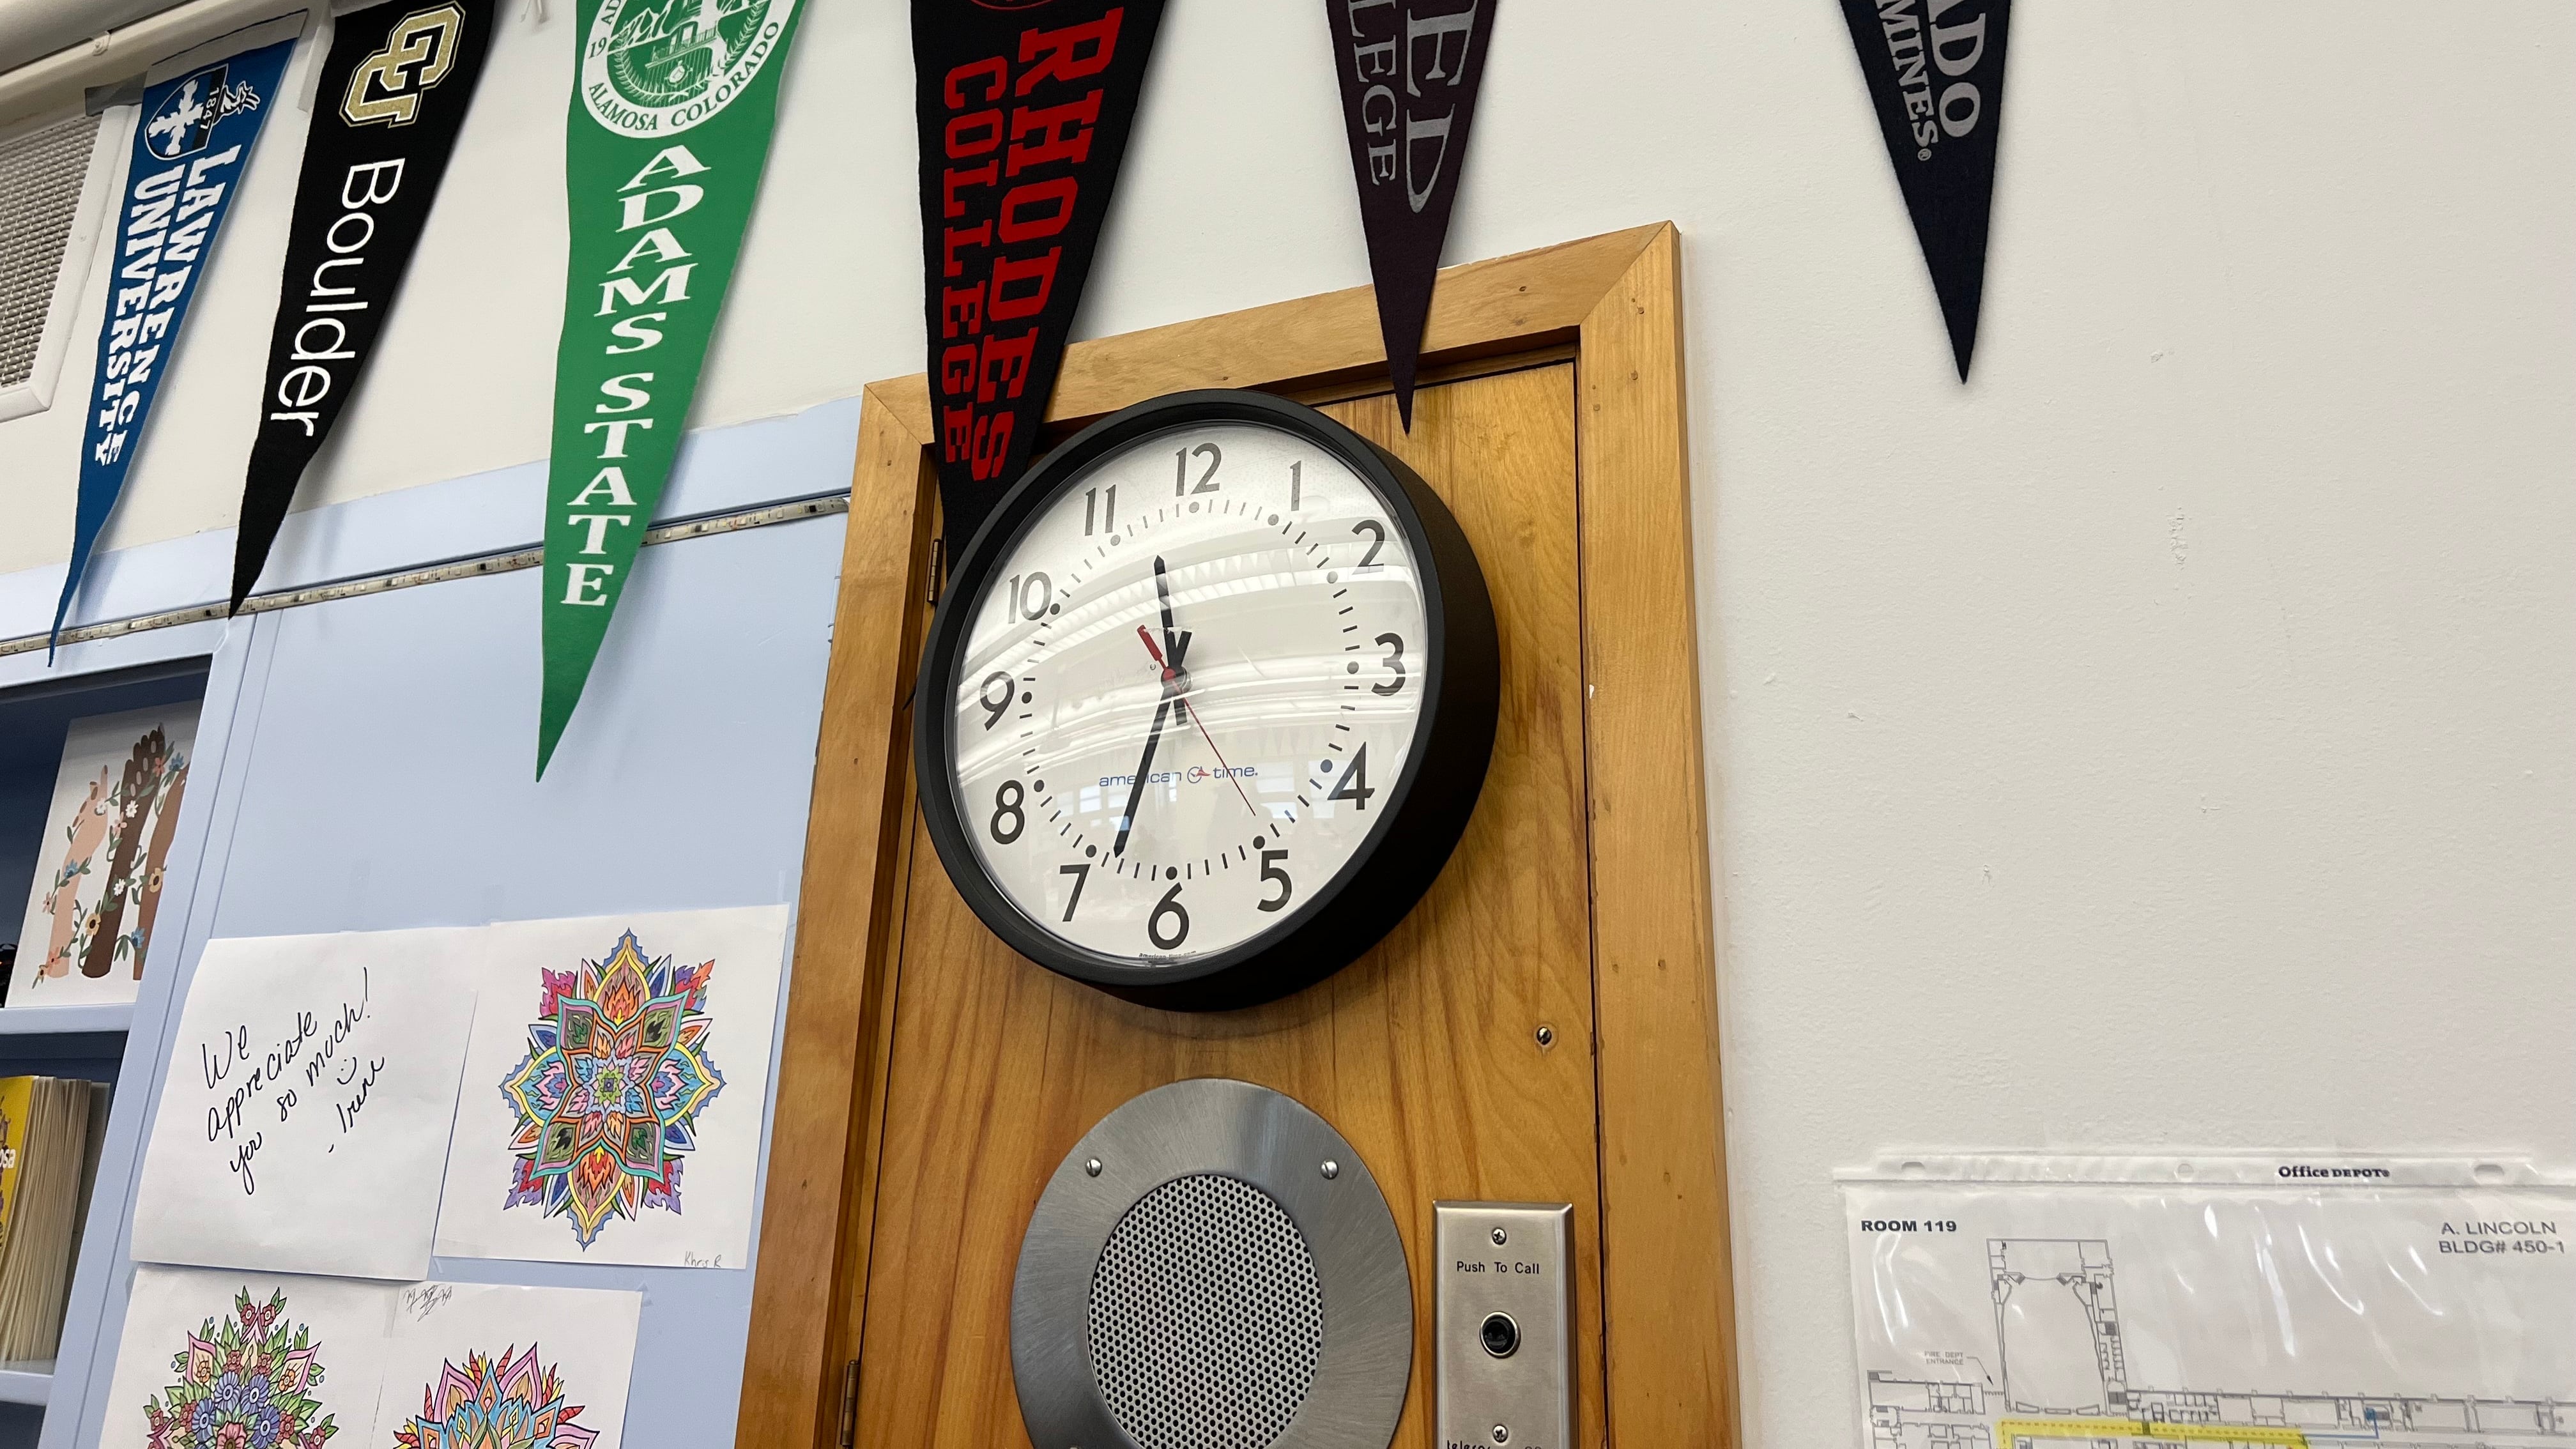 College pennant flags hang inside Lincoln High School in Denver above a clock.